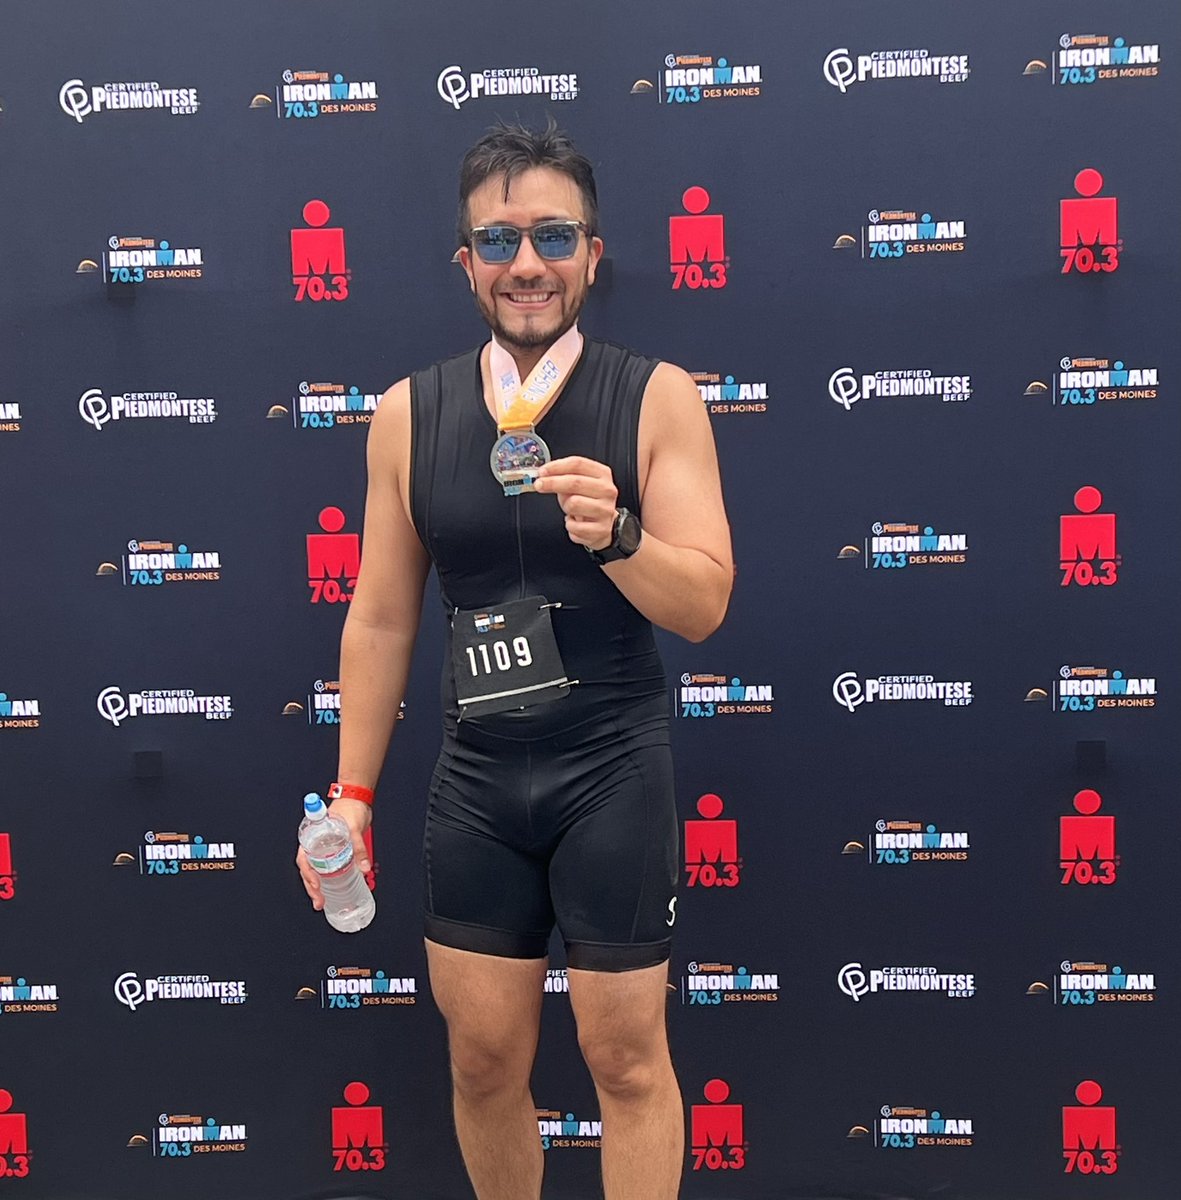 Personal Milestone: First Half Iron man. 🏊‍♂️ 🚴 🏃‍♀️ 
June 2023: Cardiology graduation, end of chief fellow year, moving to Seattle, UW for IC, half iron man, and expecting a baby girl 👧. 
#ironman #triathlon @IRONMANtri @IRONMANLive